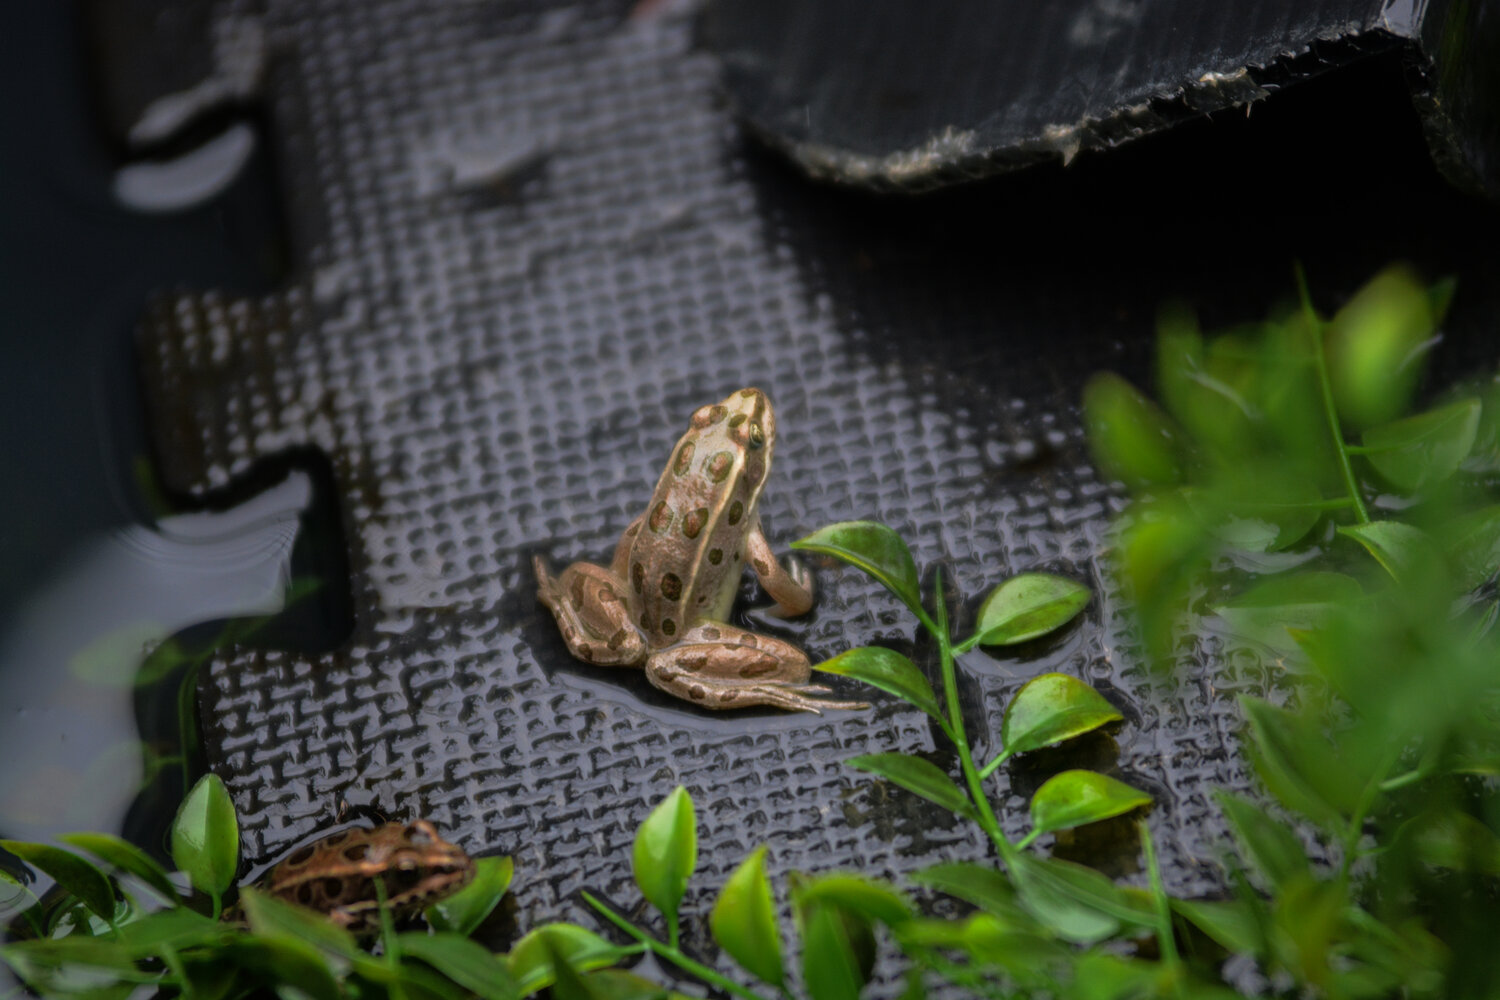 Over 50 northern leopard frogs were observed for weight, measurements and tagging on Aug. 9 at Northwest Trek in Eatonville.